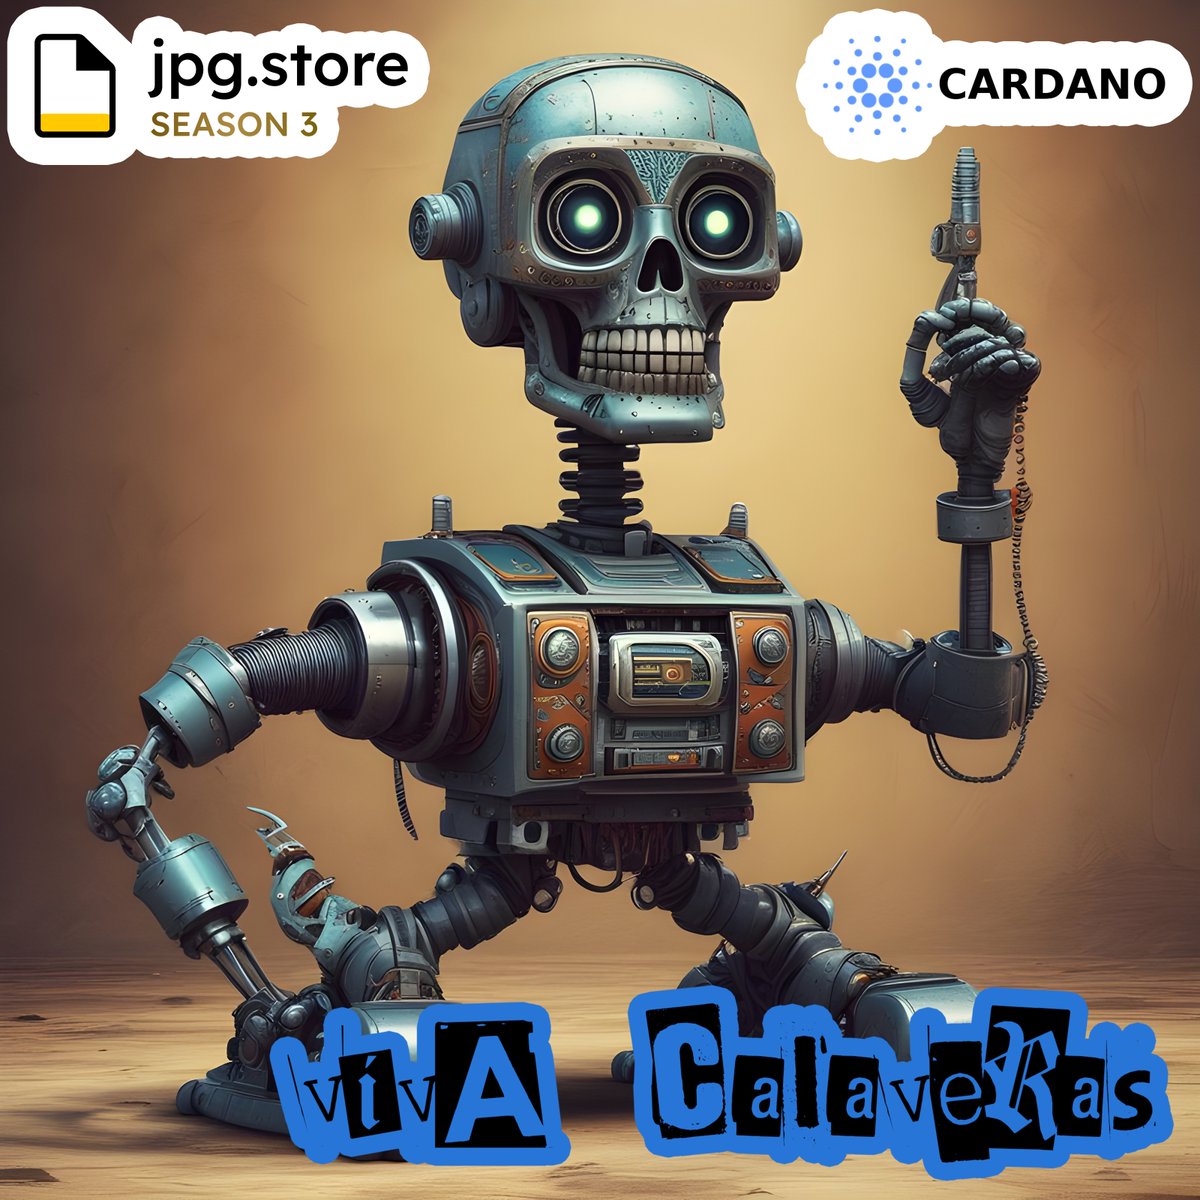 Viva Calaveras on Cardano via jpg.store ! These NFTs can be redeemed for a signed 3D printed K-SCOPES® Trading Card.

Greez
jpg.store/listing/226769…

#cardano #ADA #CardanoNFT #NFT #vivacalaveras #calaveras #kscopes #tradingcards #3dprinting #AI #AImusic